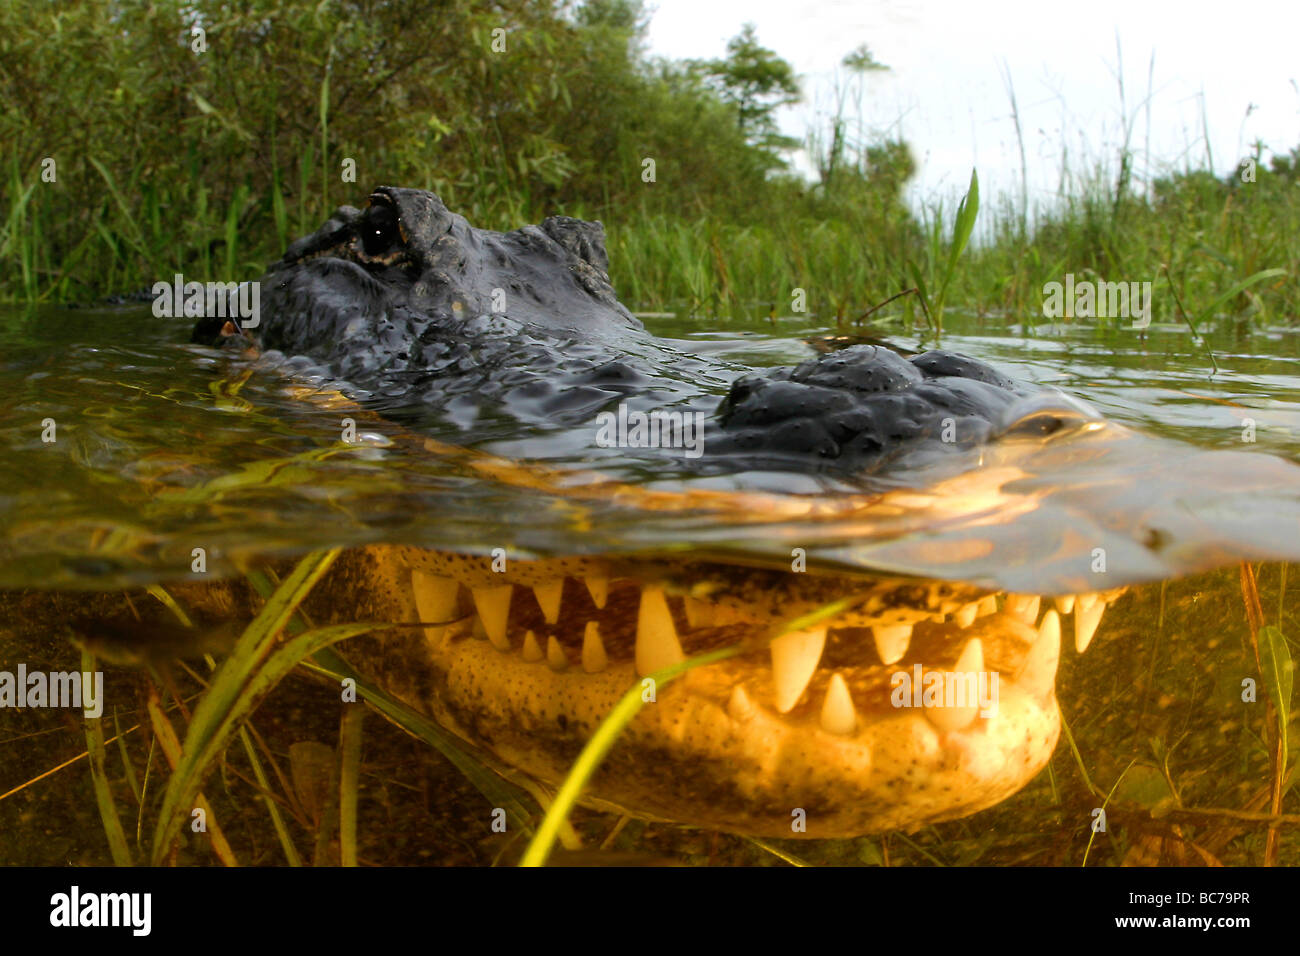 American Alligator, Alligator mississippiensis, which is also known as a Florida Alligator Stock Photo